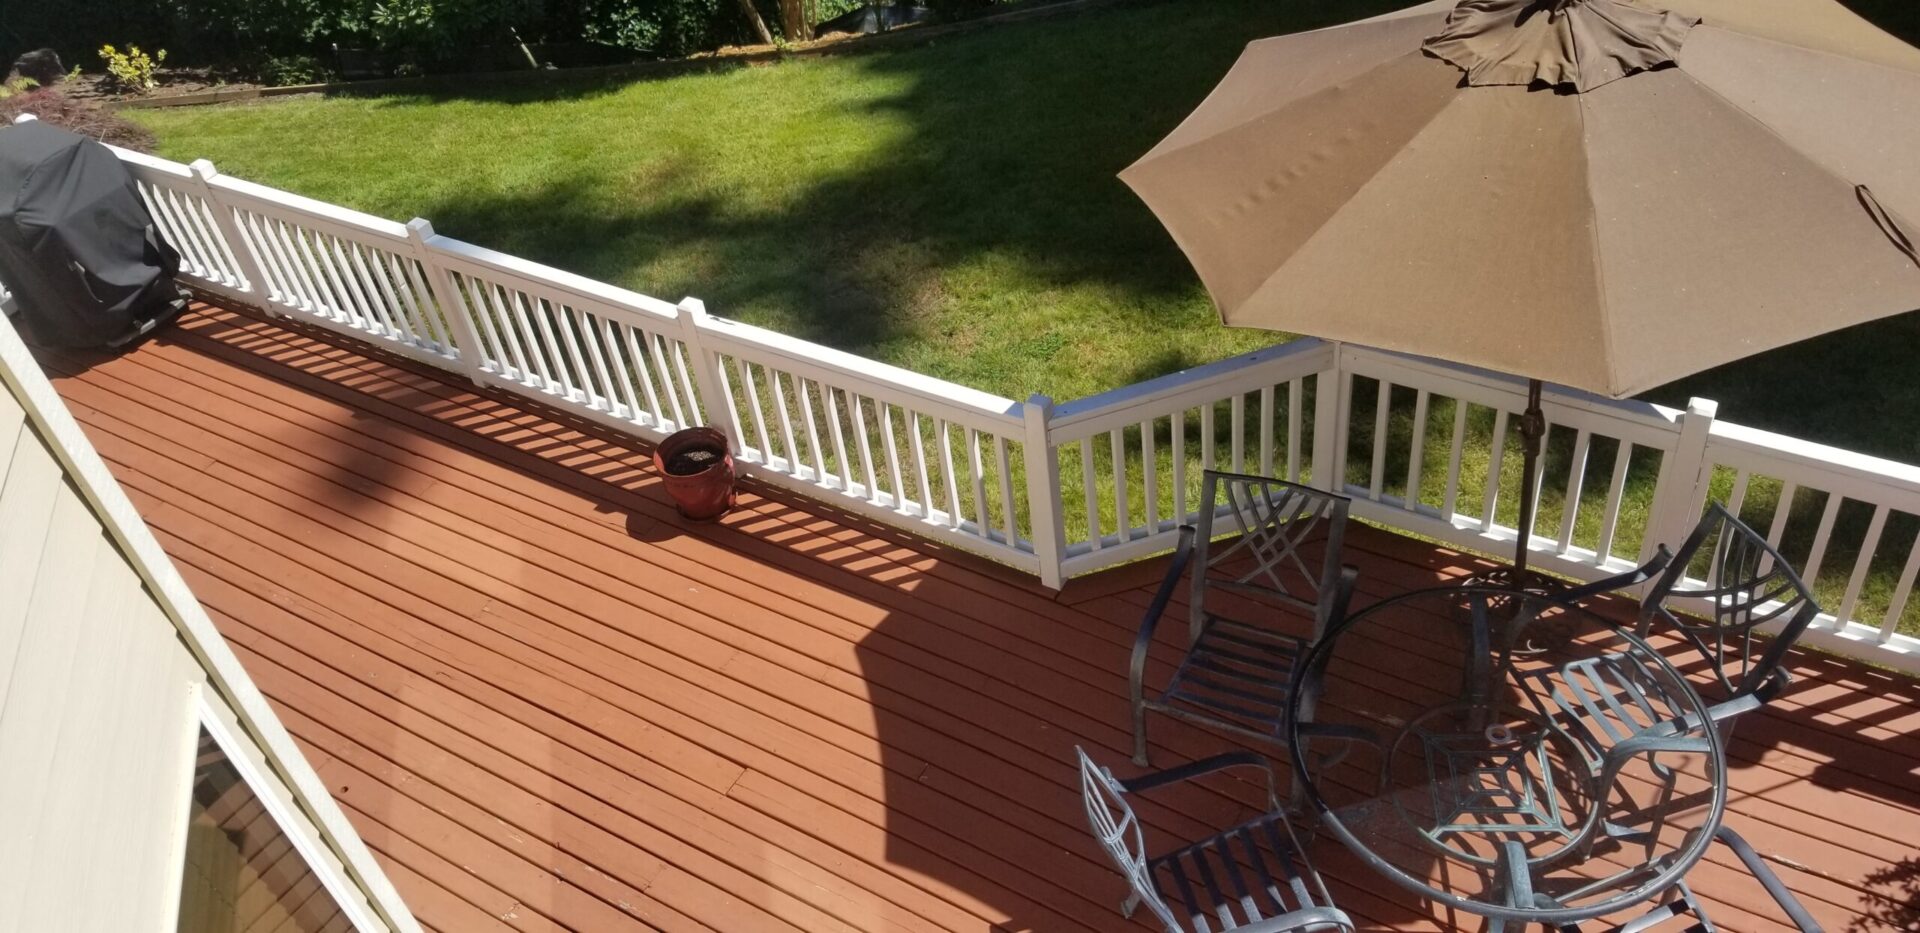 Composite Decking With white color Railing